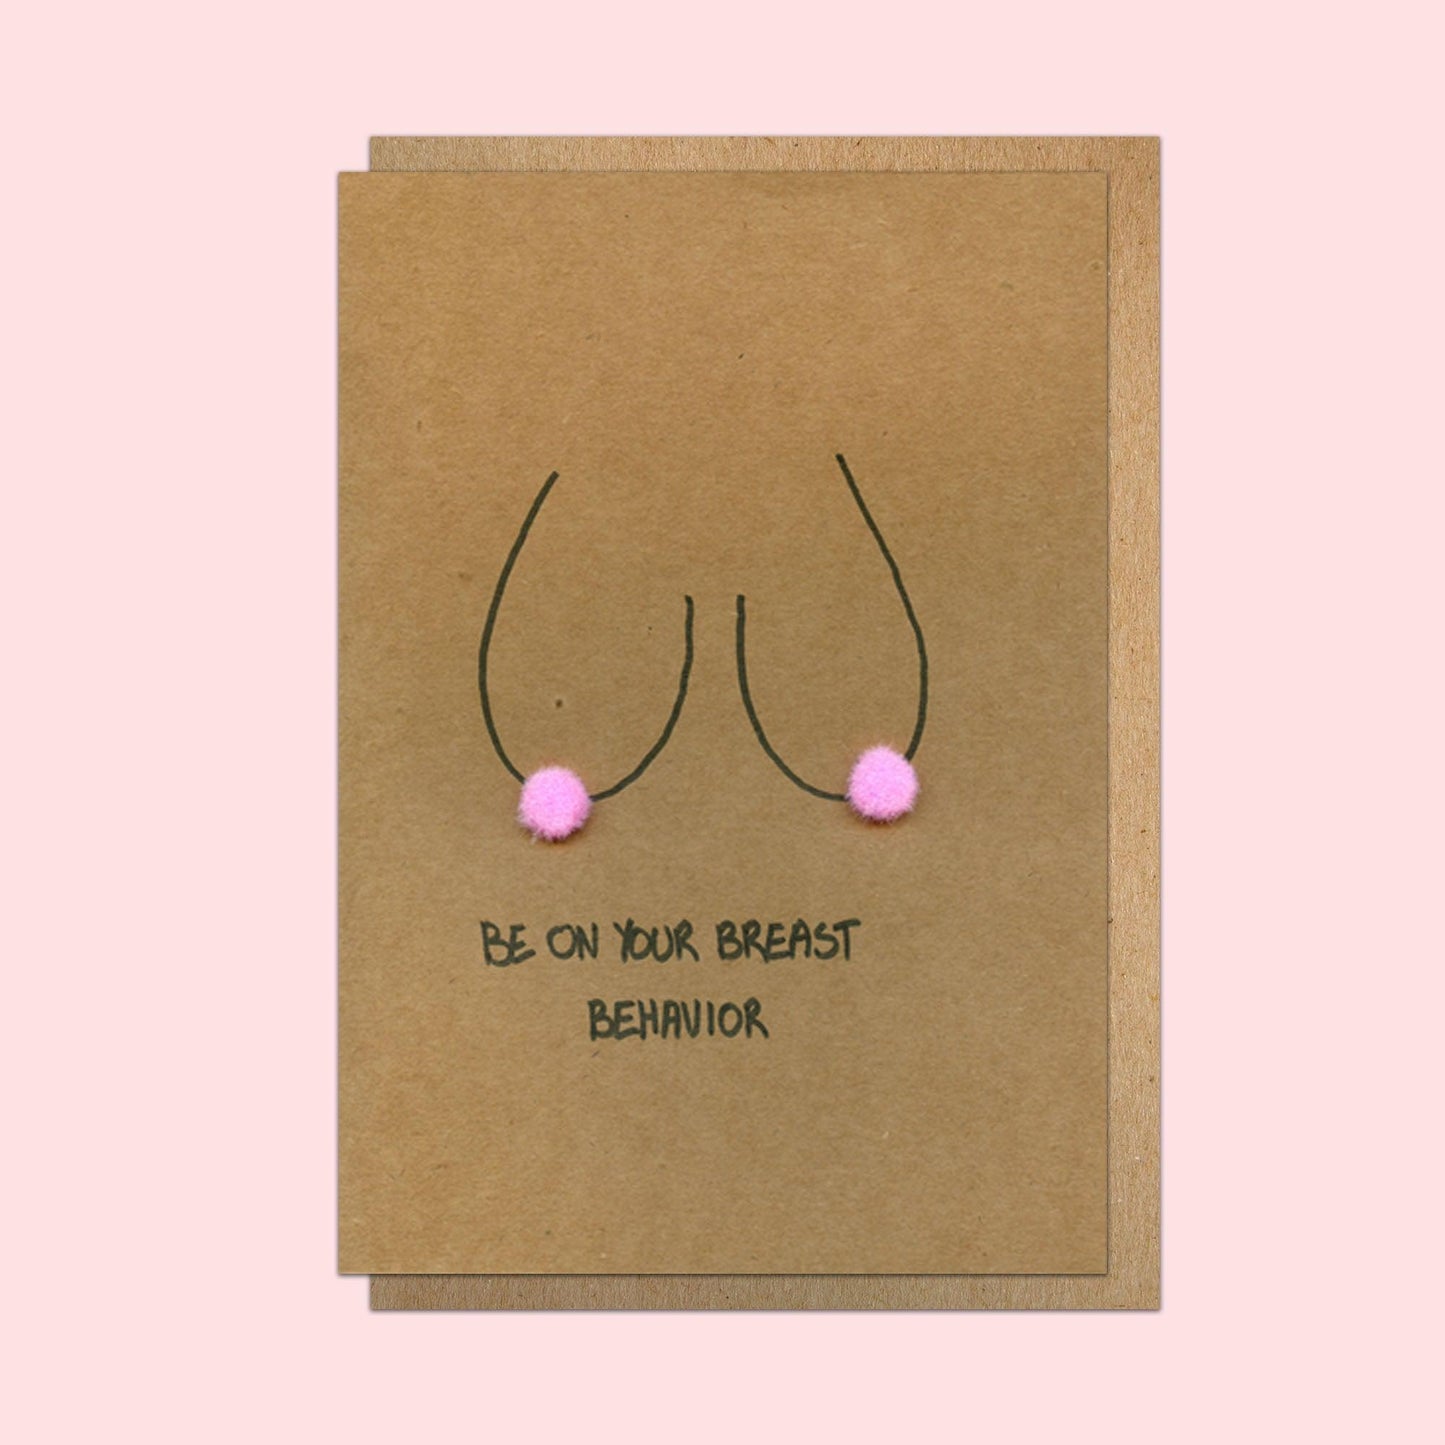 Boob Pun Card 'Be On Your Breast Behavior' - Candid Almond